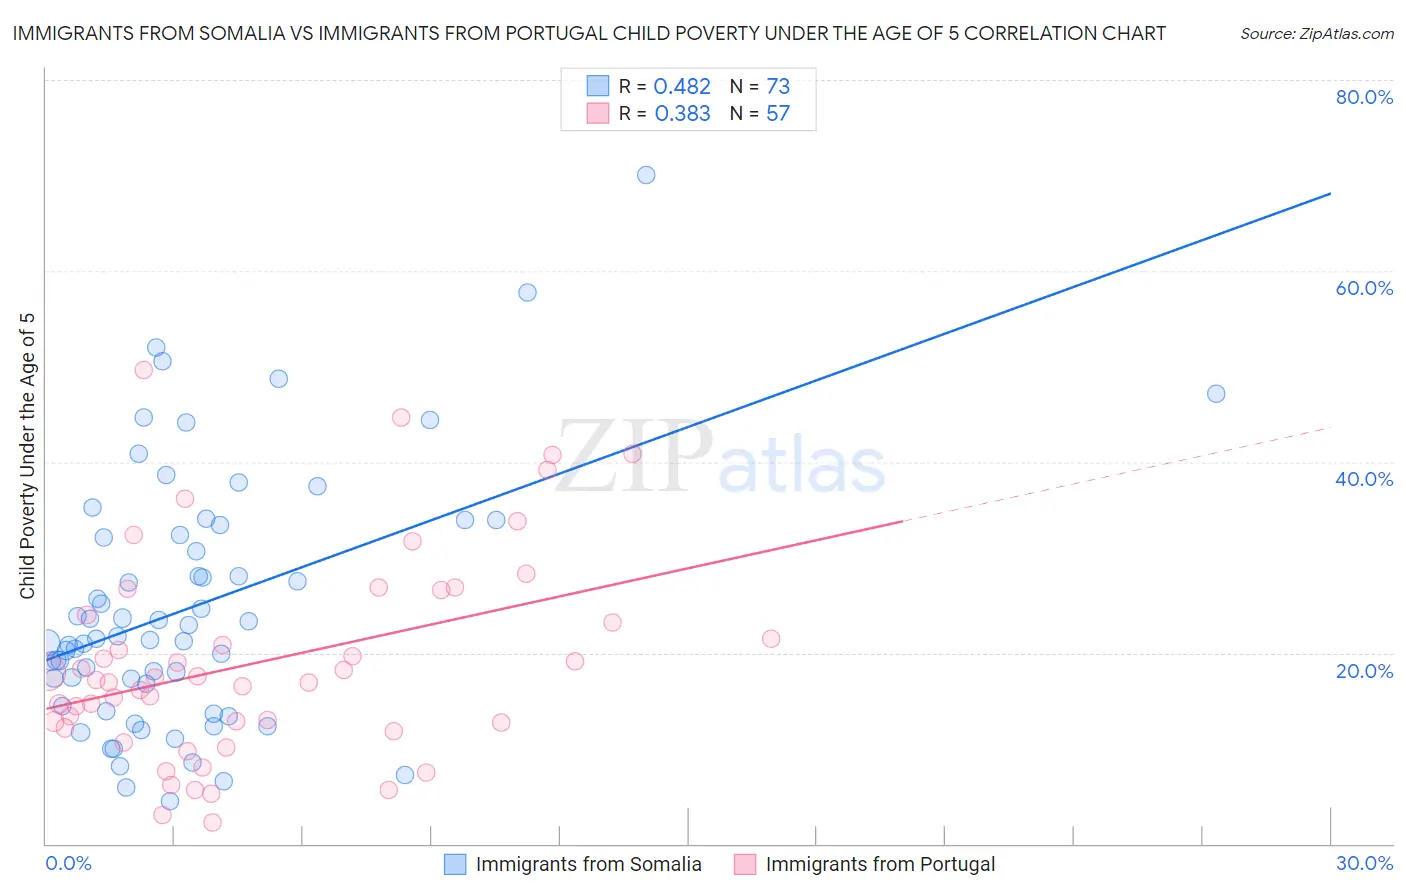 Immigrants from Somalia vs Immigrants from Portugal Child Poverty Under the Age of 5